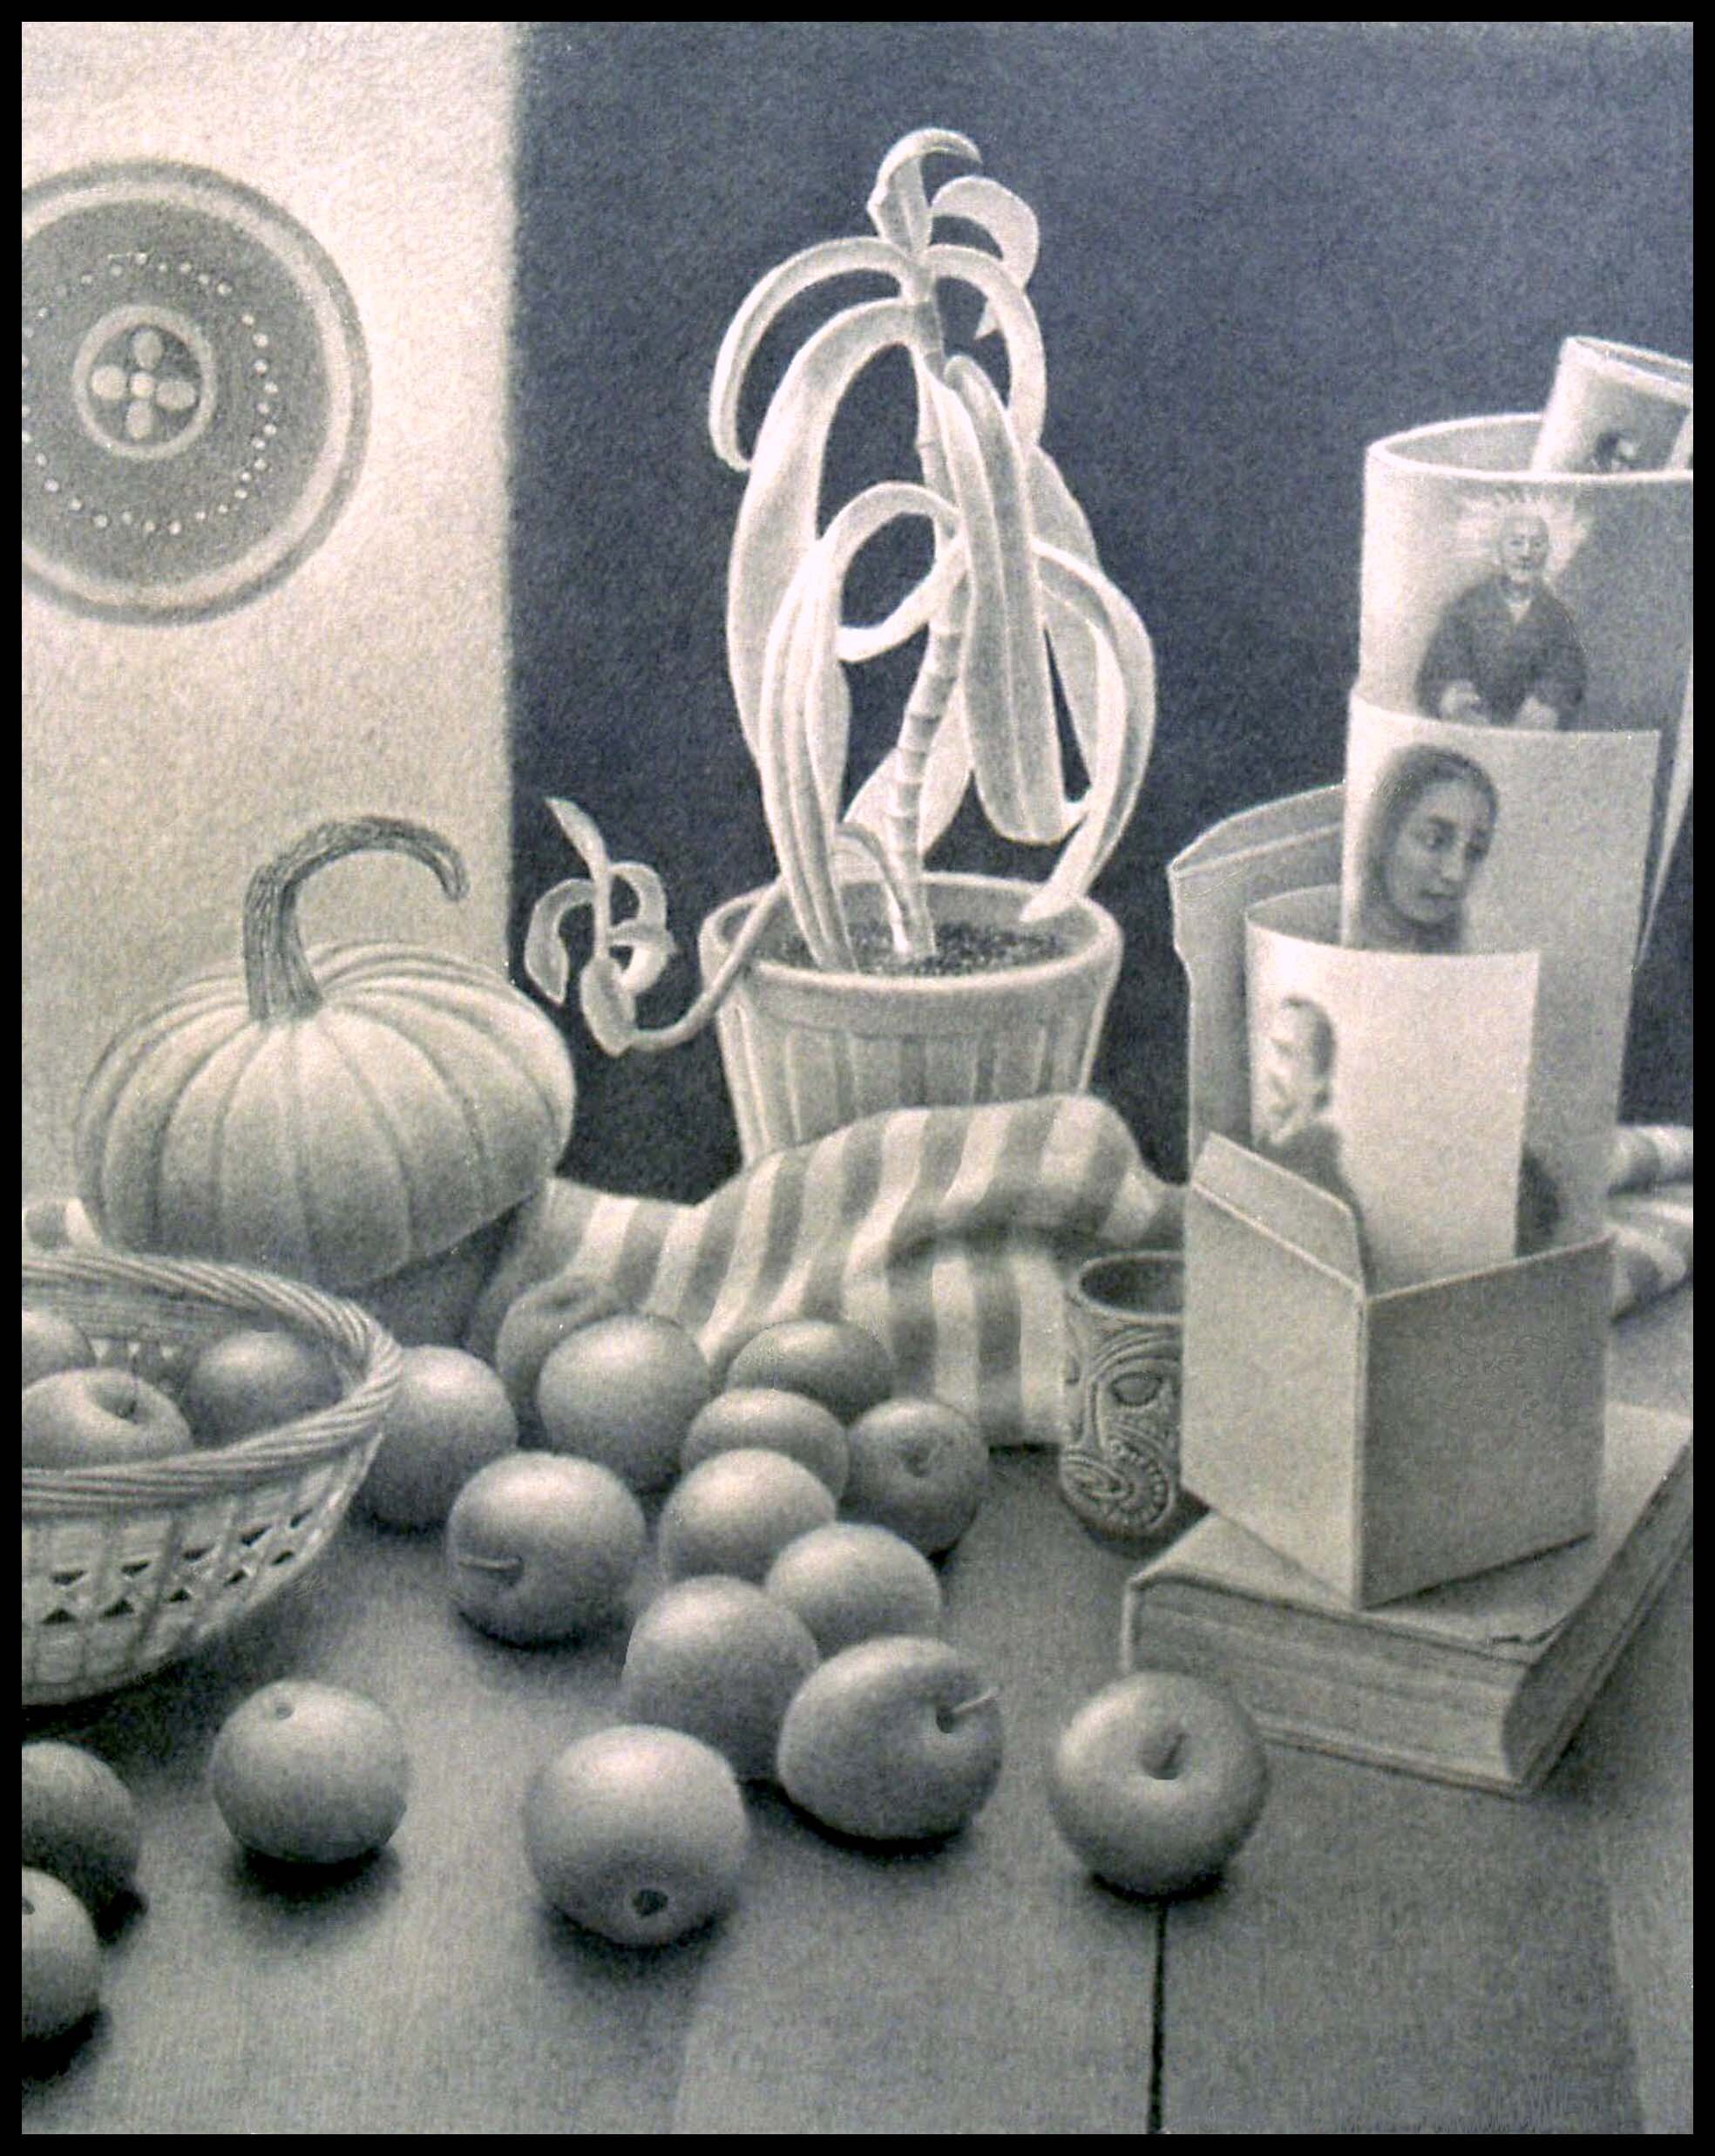  Apples and Photos (14”x12”) Graphite on Rives 